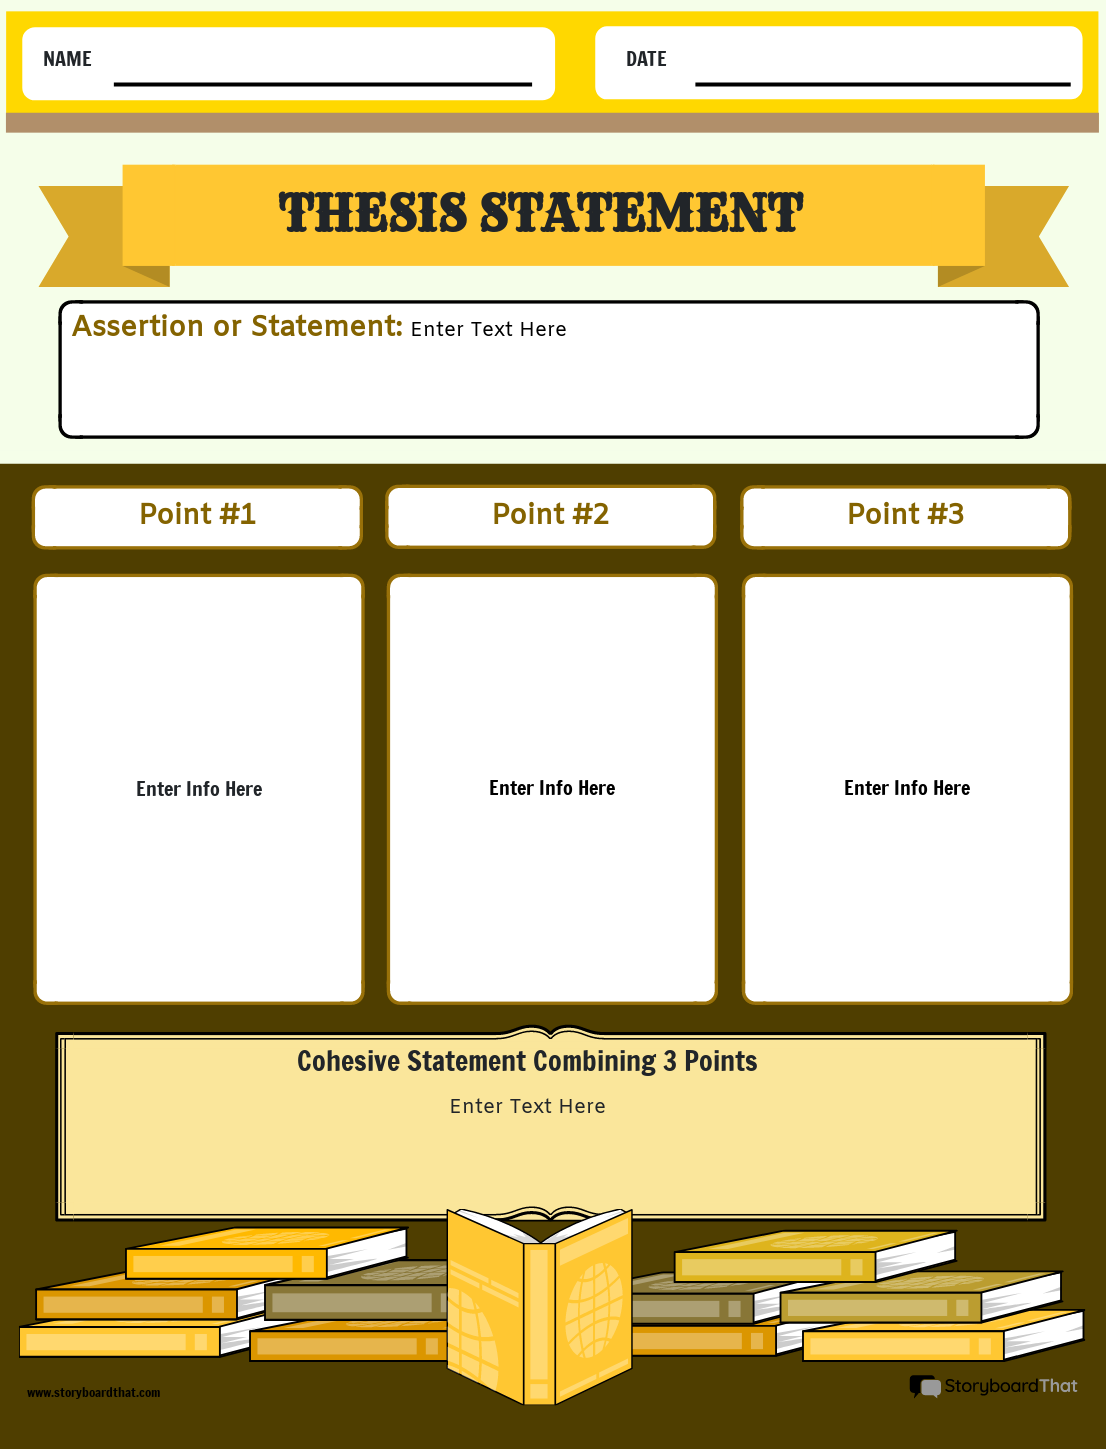 Thesis Statement Worksheet Featuring a Book Theme